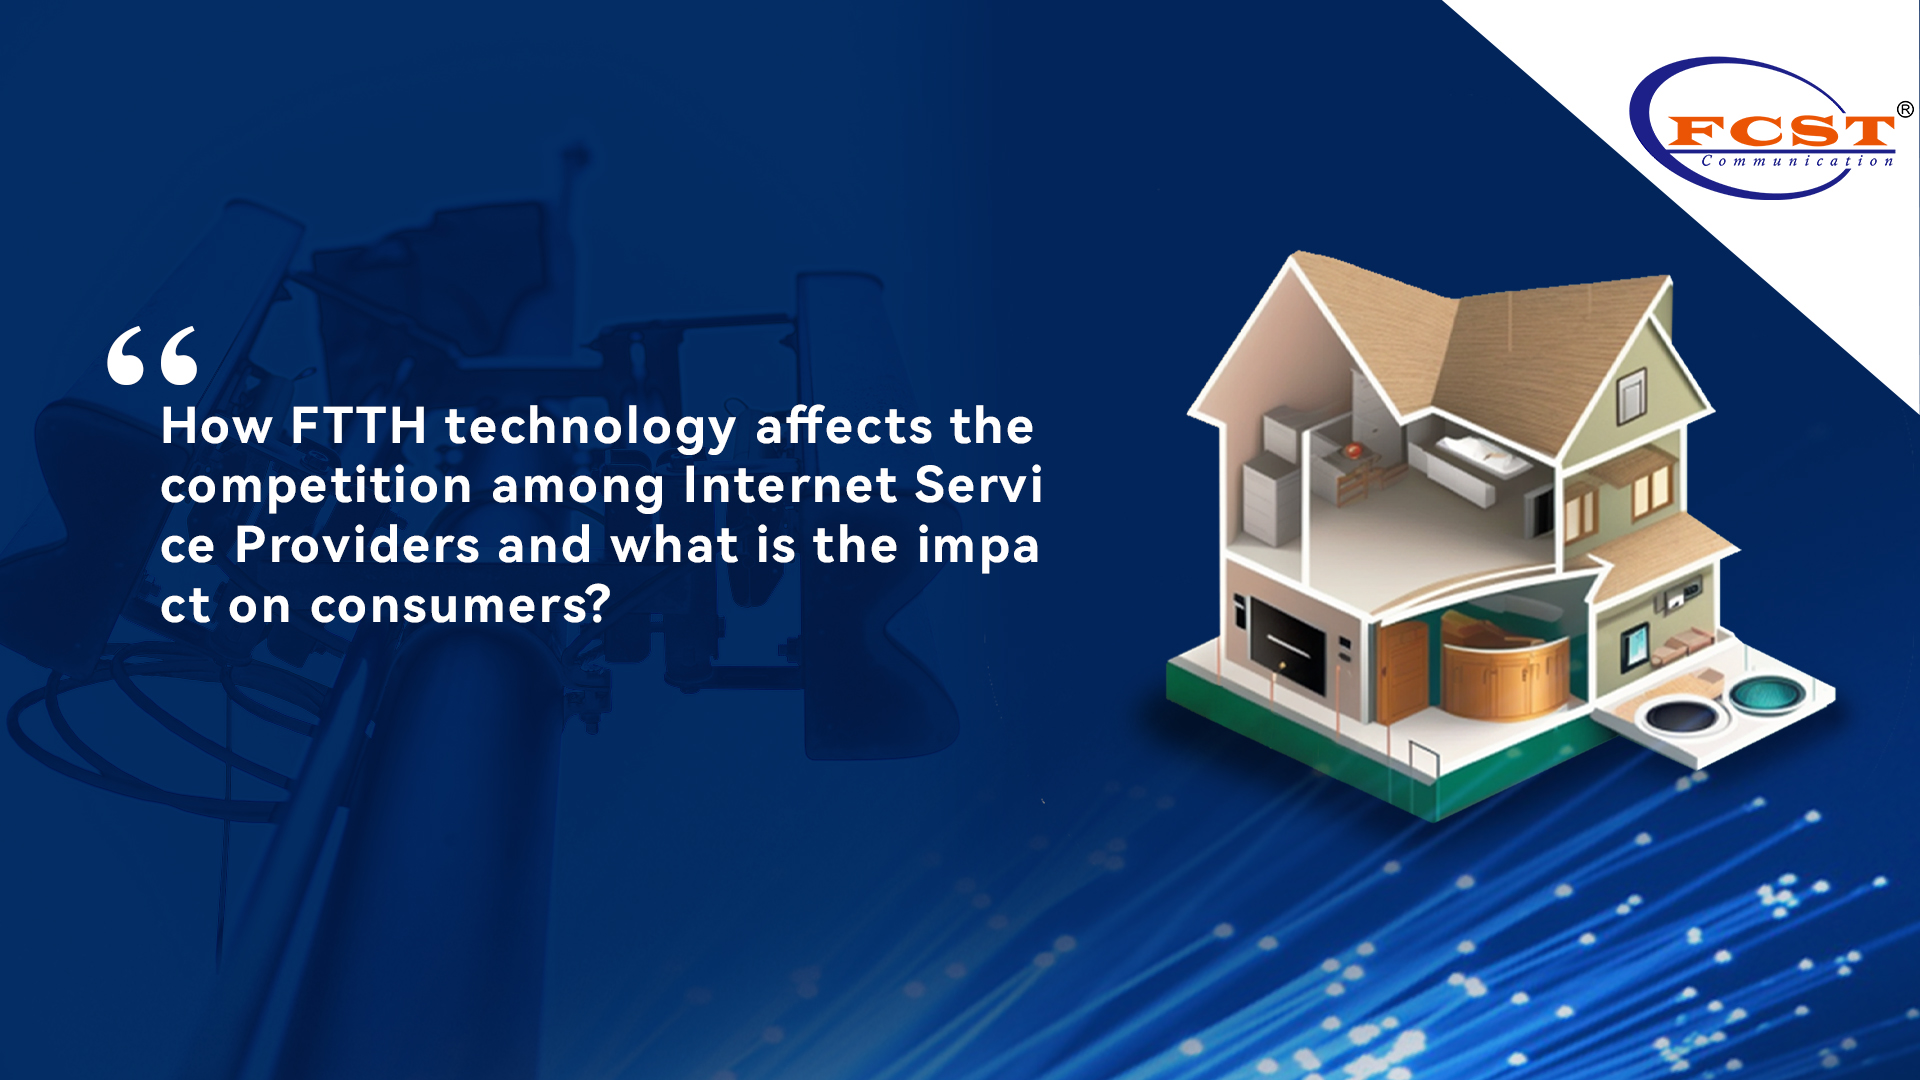 How FTTH technology affects the competition among Internet Service Providers and what is the impact on consumers?